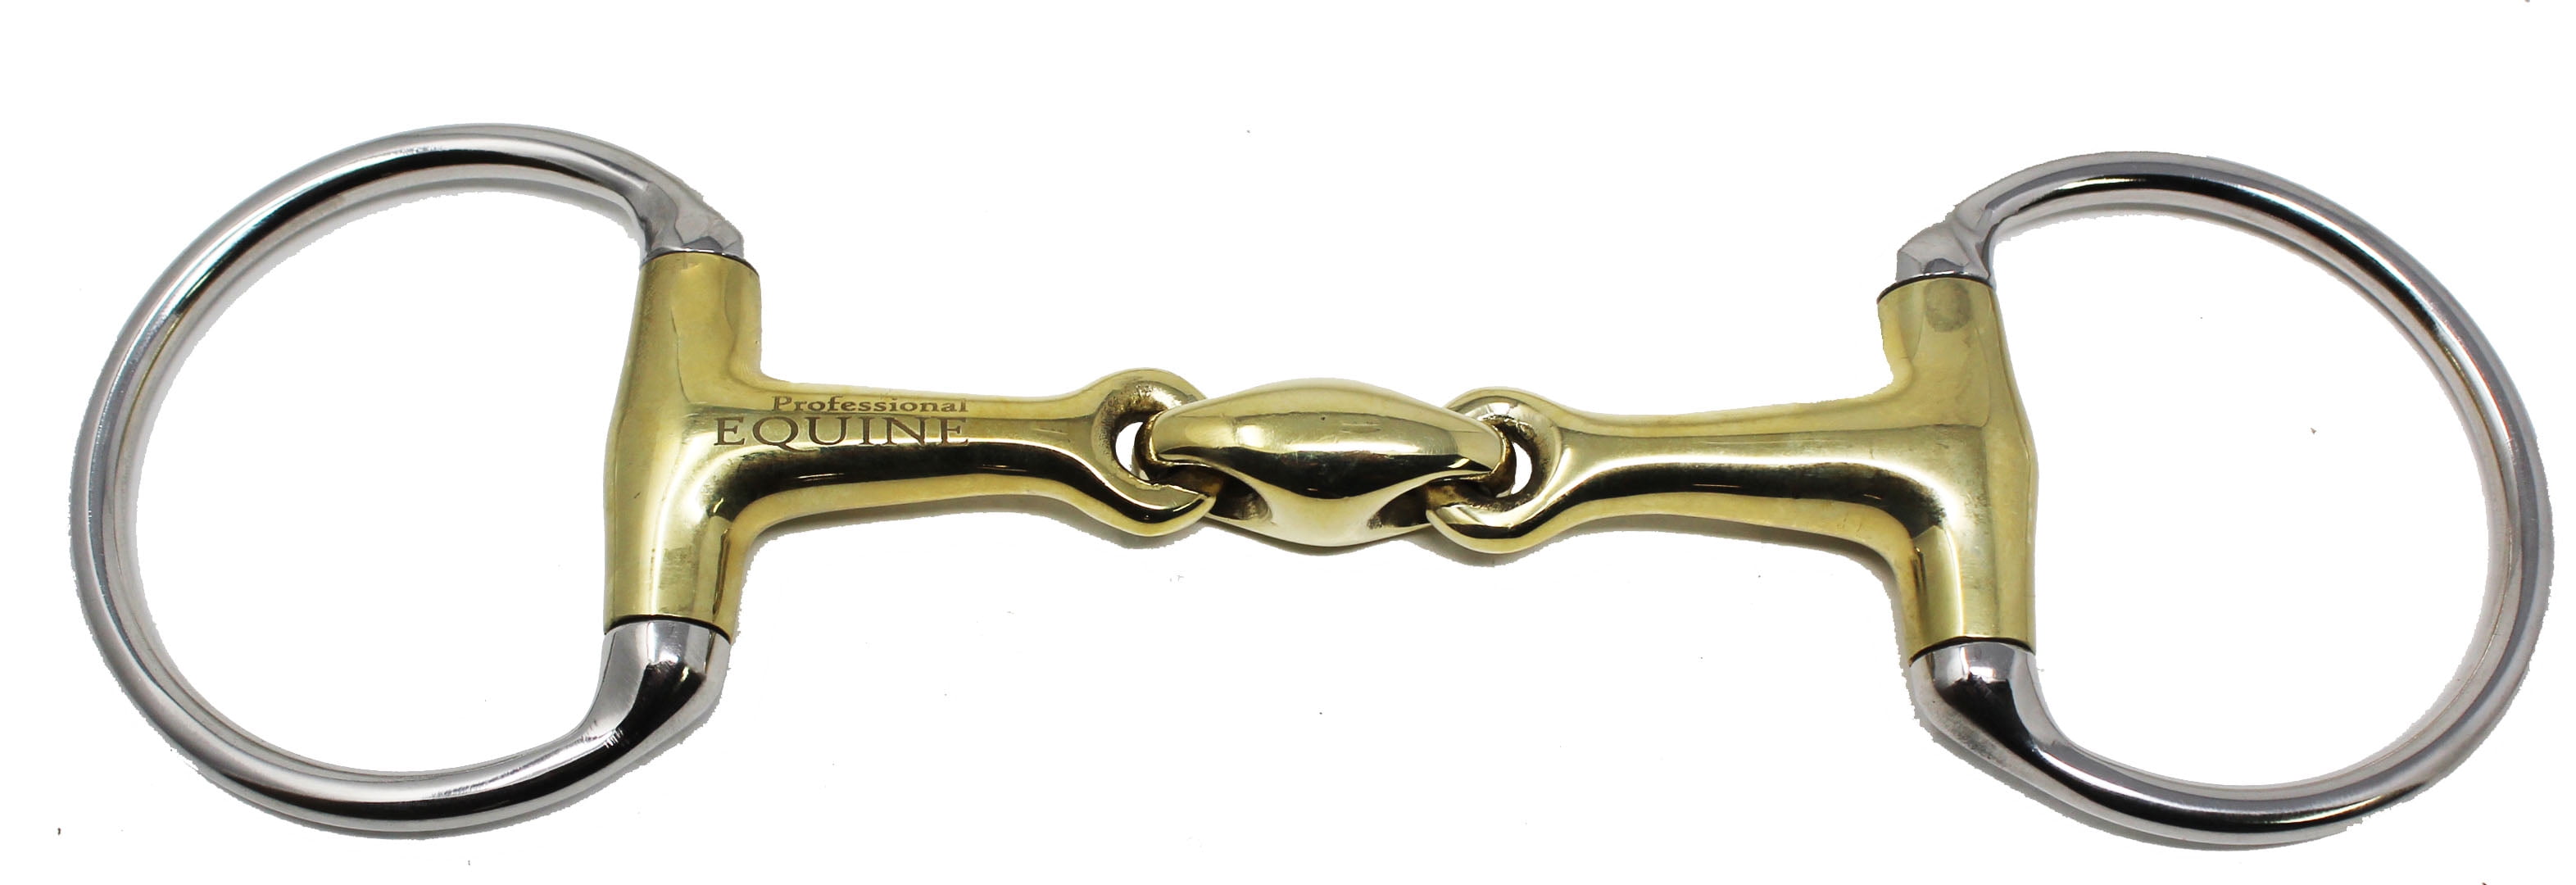 Hilason Stainless Steel Training Horse Bit Snaffle Mouth W/Sliding Copper Roller 